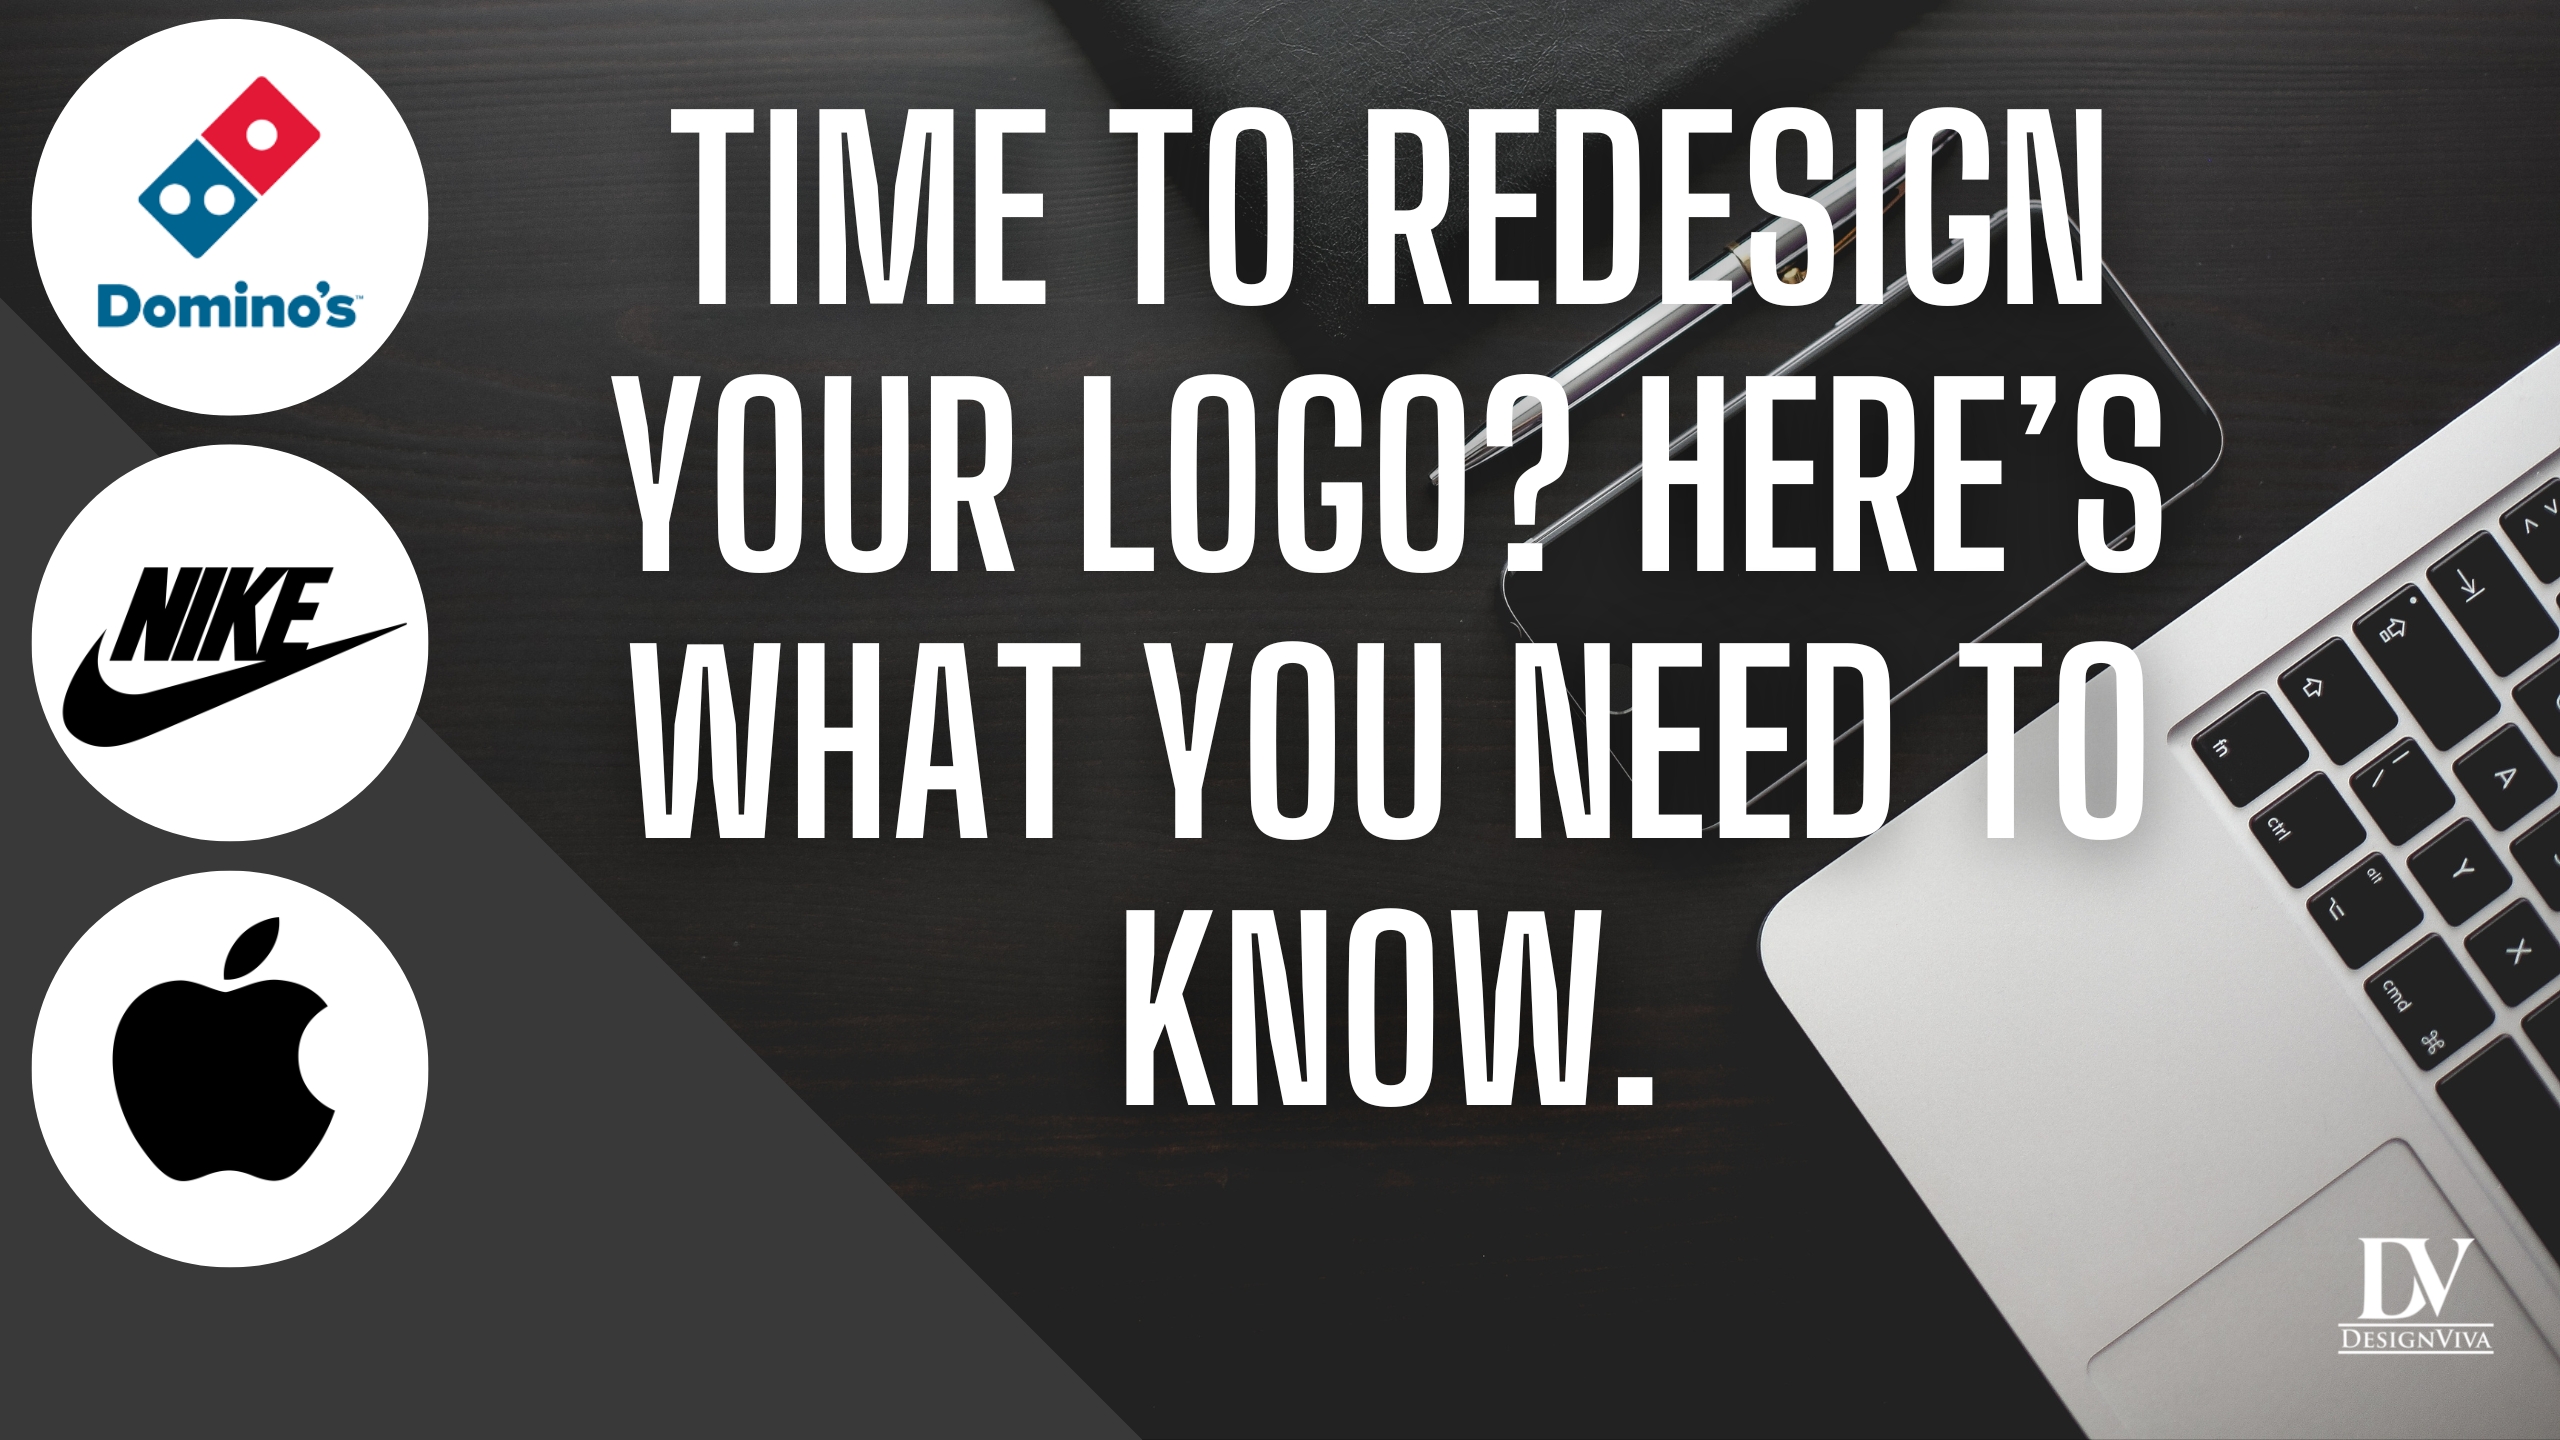 Time to redesign your logo? Here’s what you need to know.